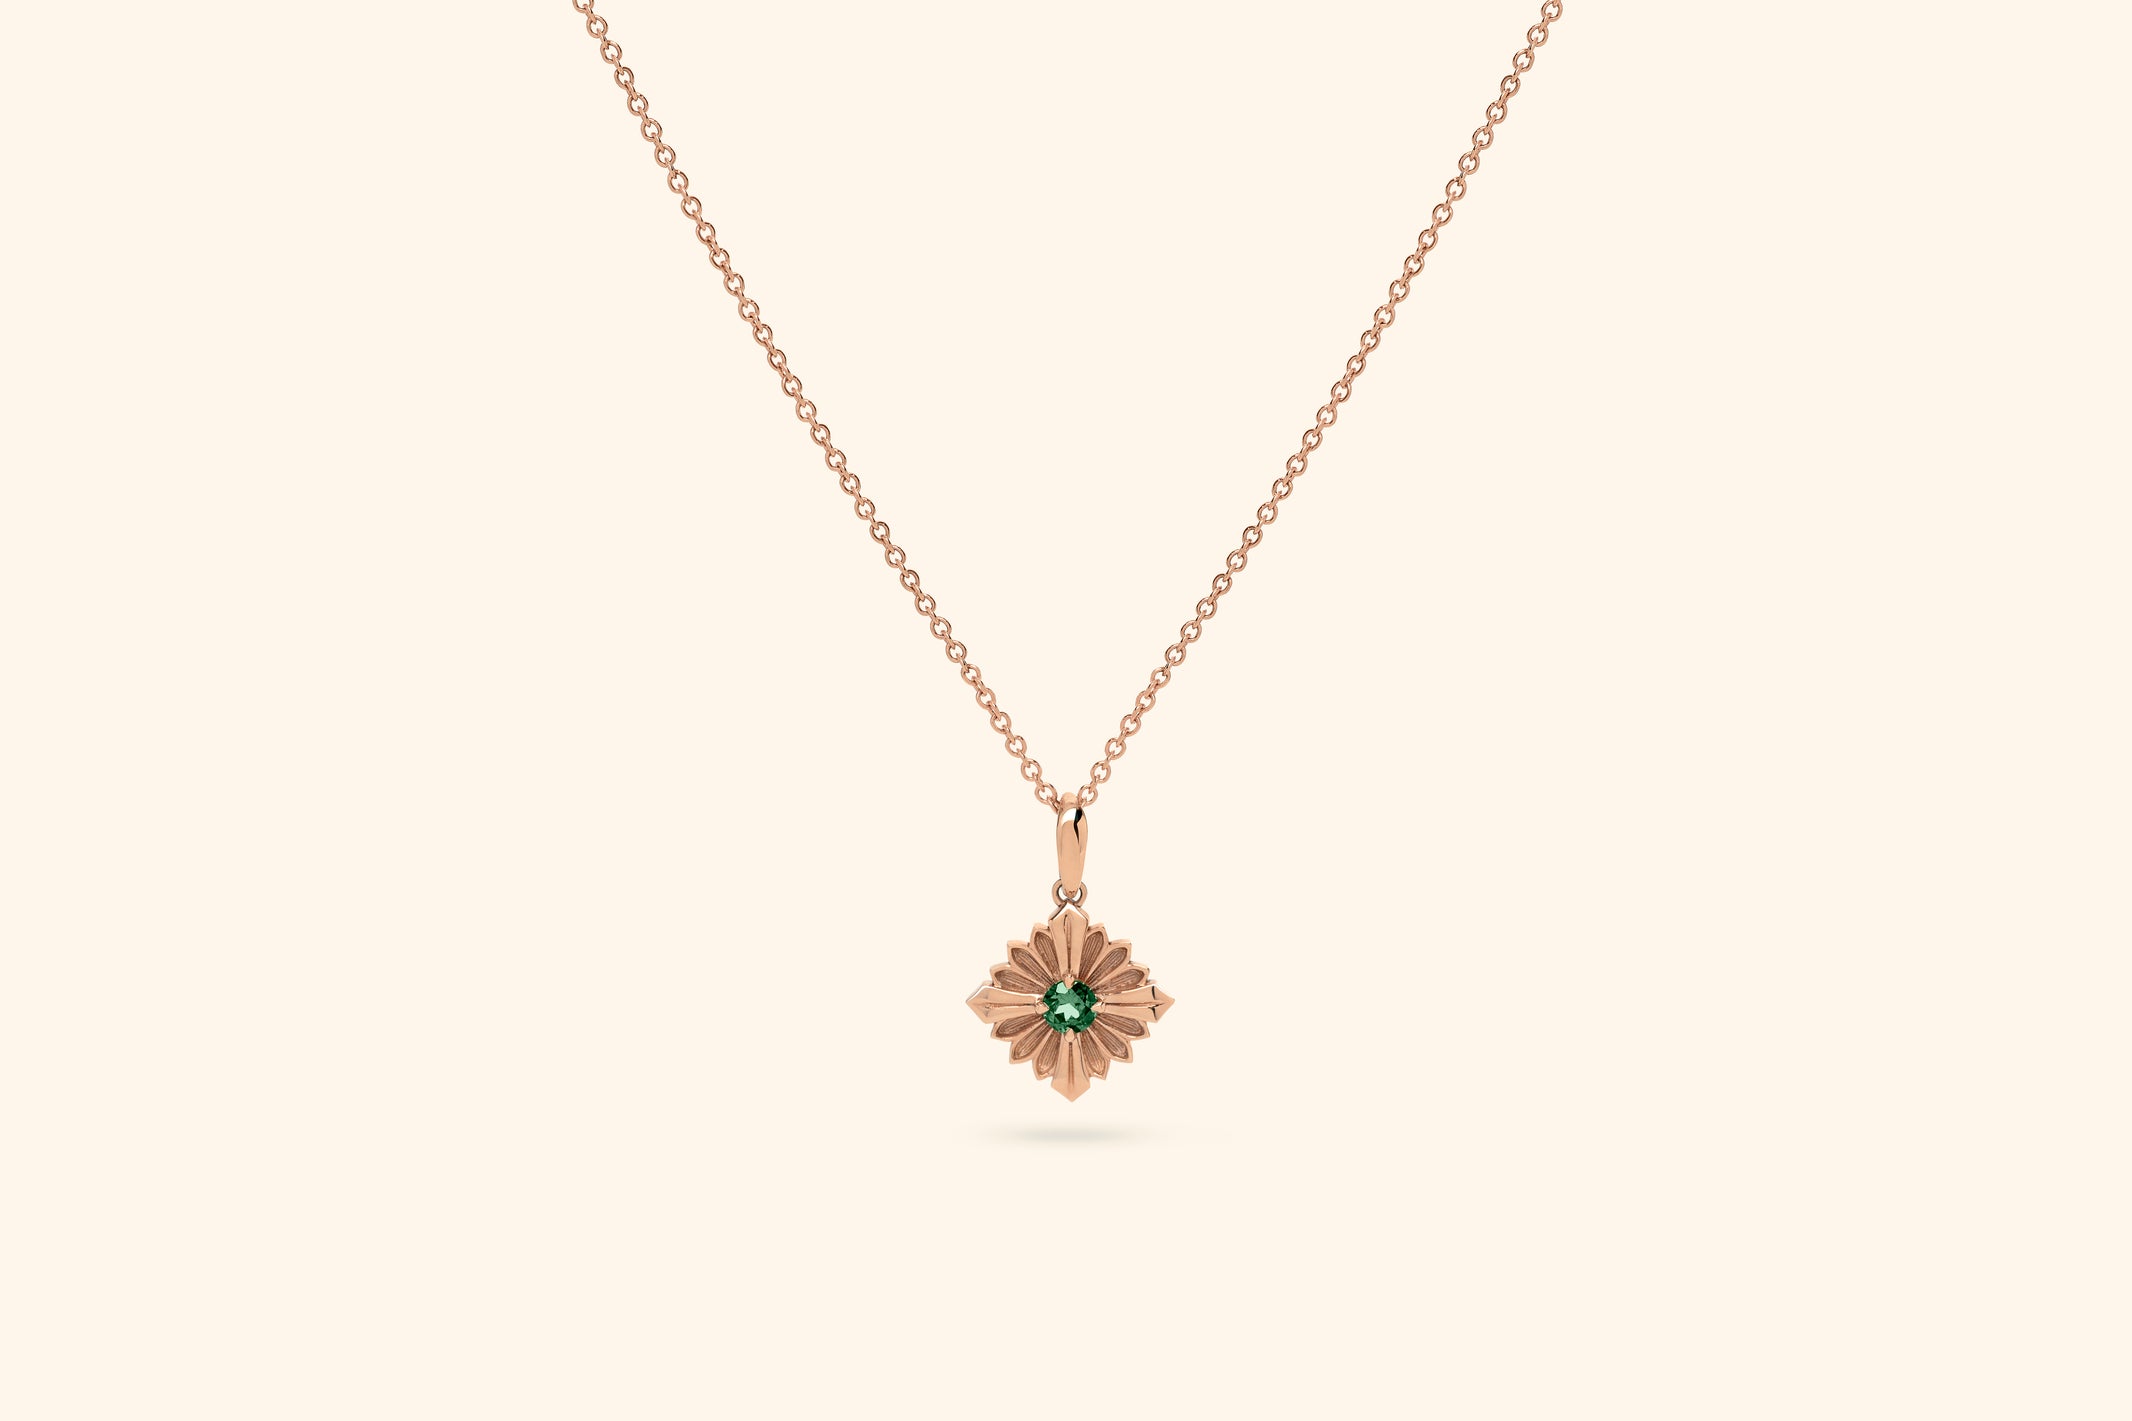 Stamp necklace, rose gold, green tourmaline